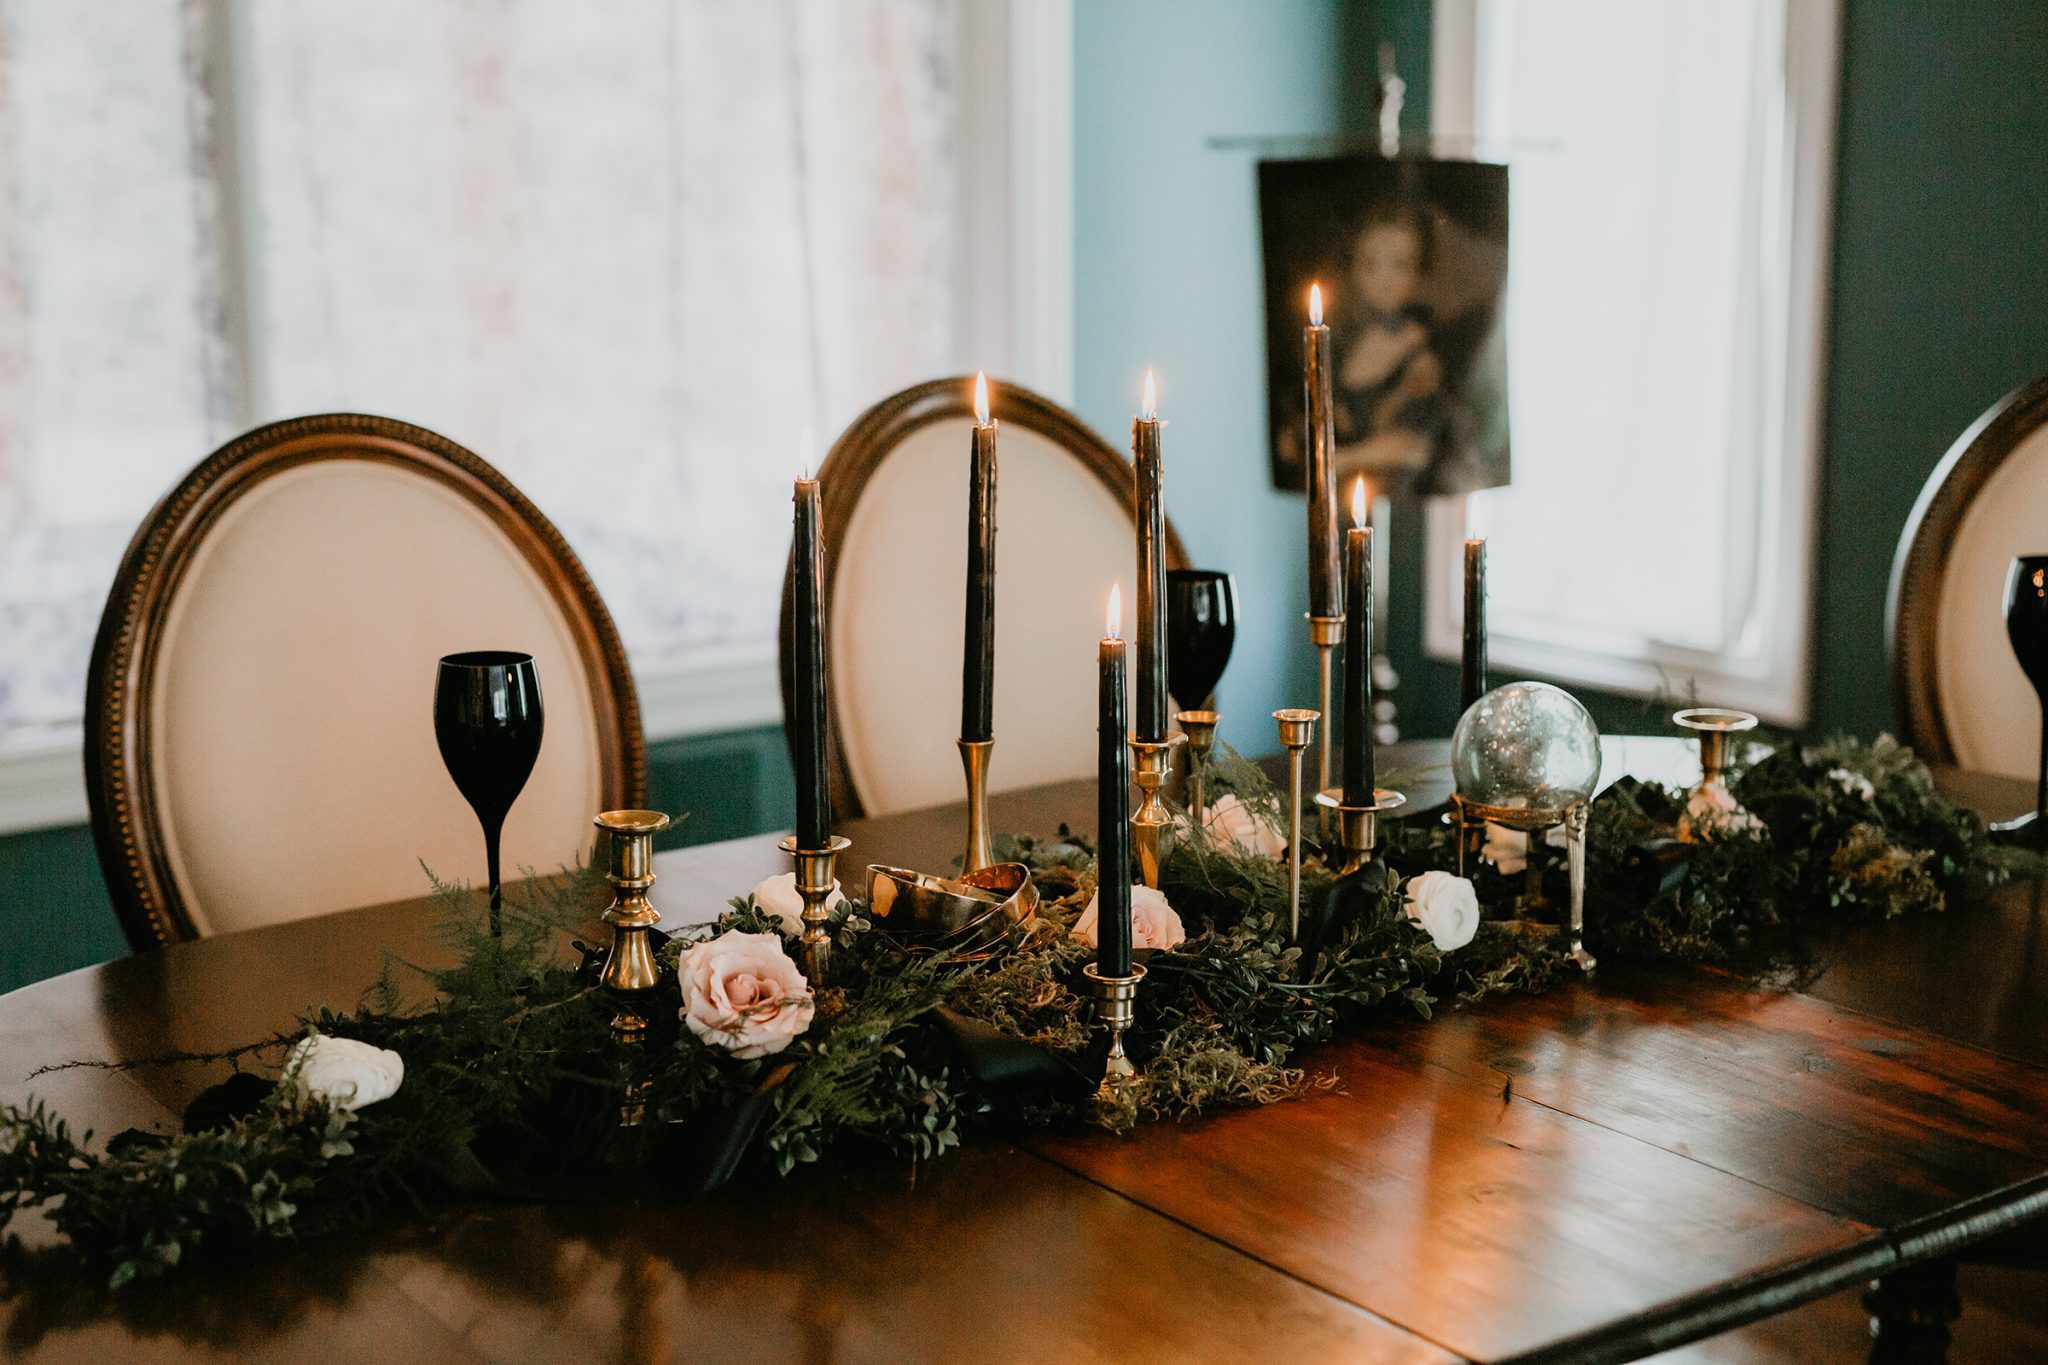 Wedding tablescape inspiration for a moody October wedding palette 